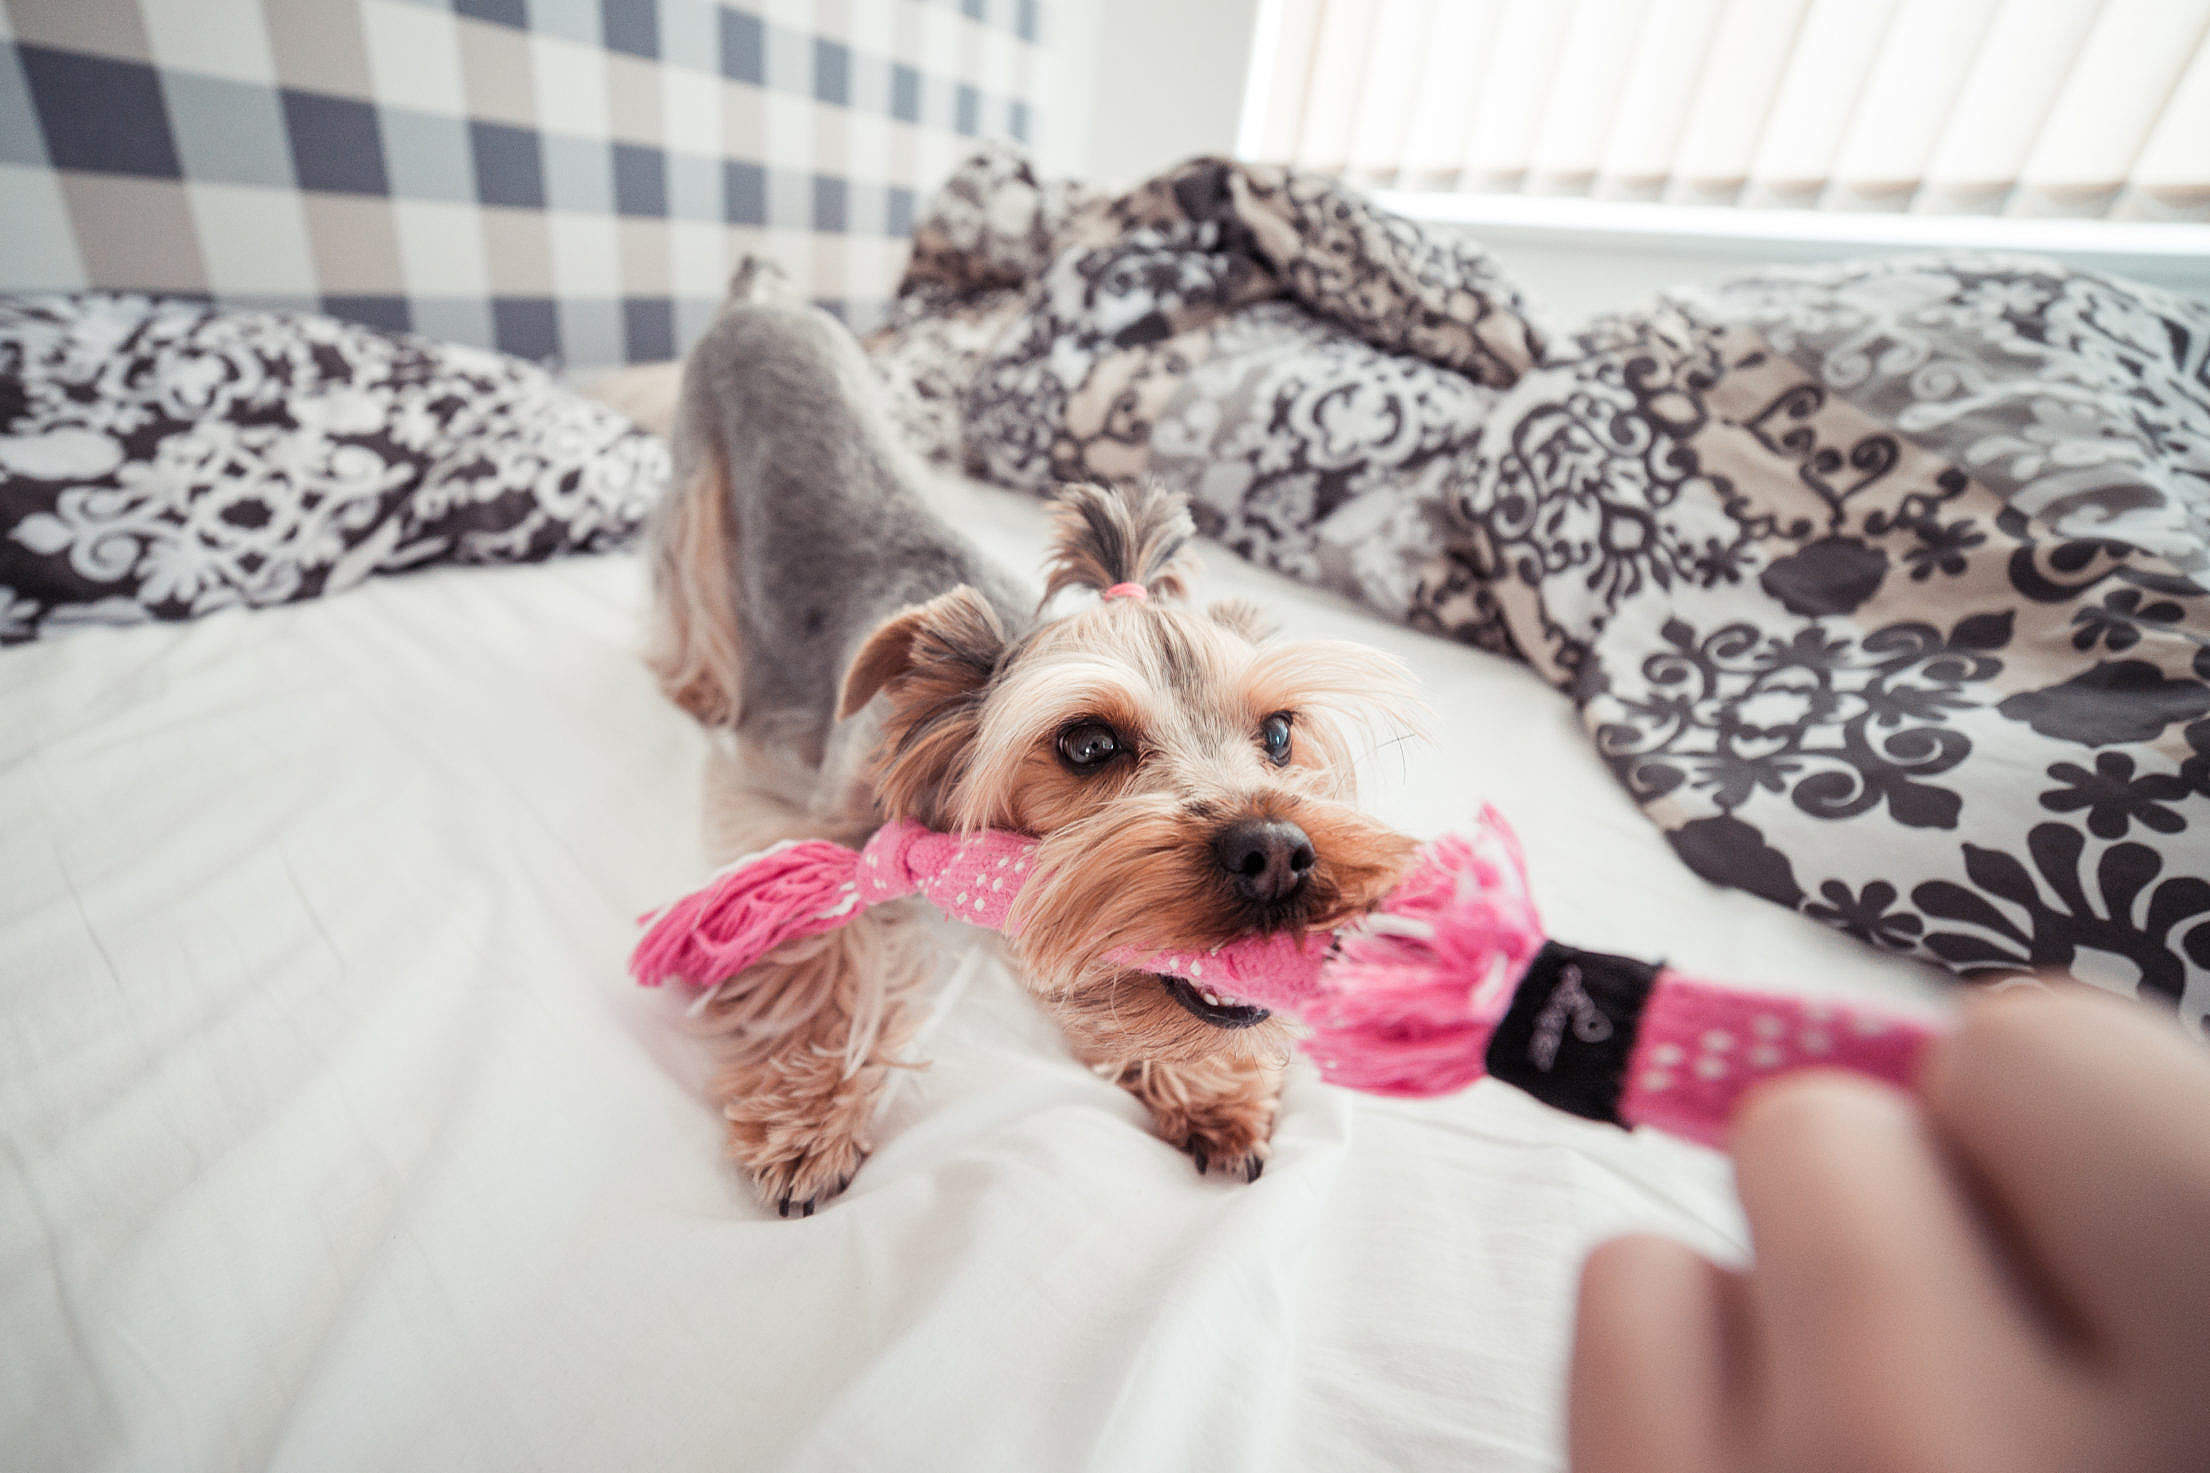 Funny Playing With Yorkie Dog at Home #2 Free Stock Photo